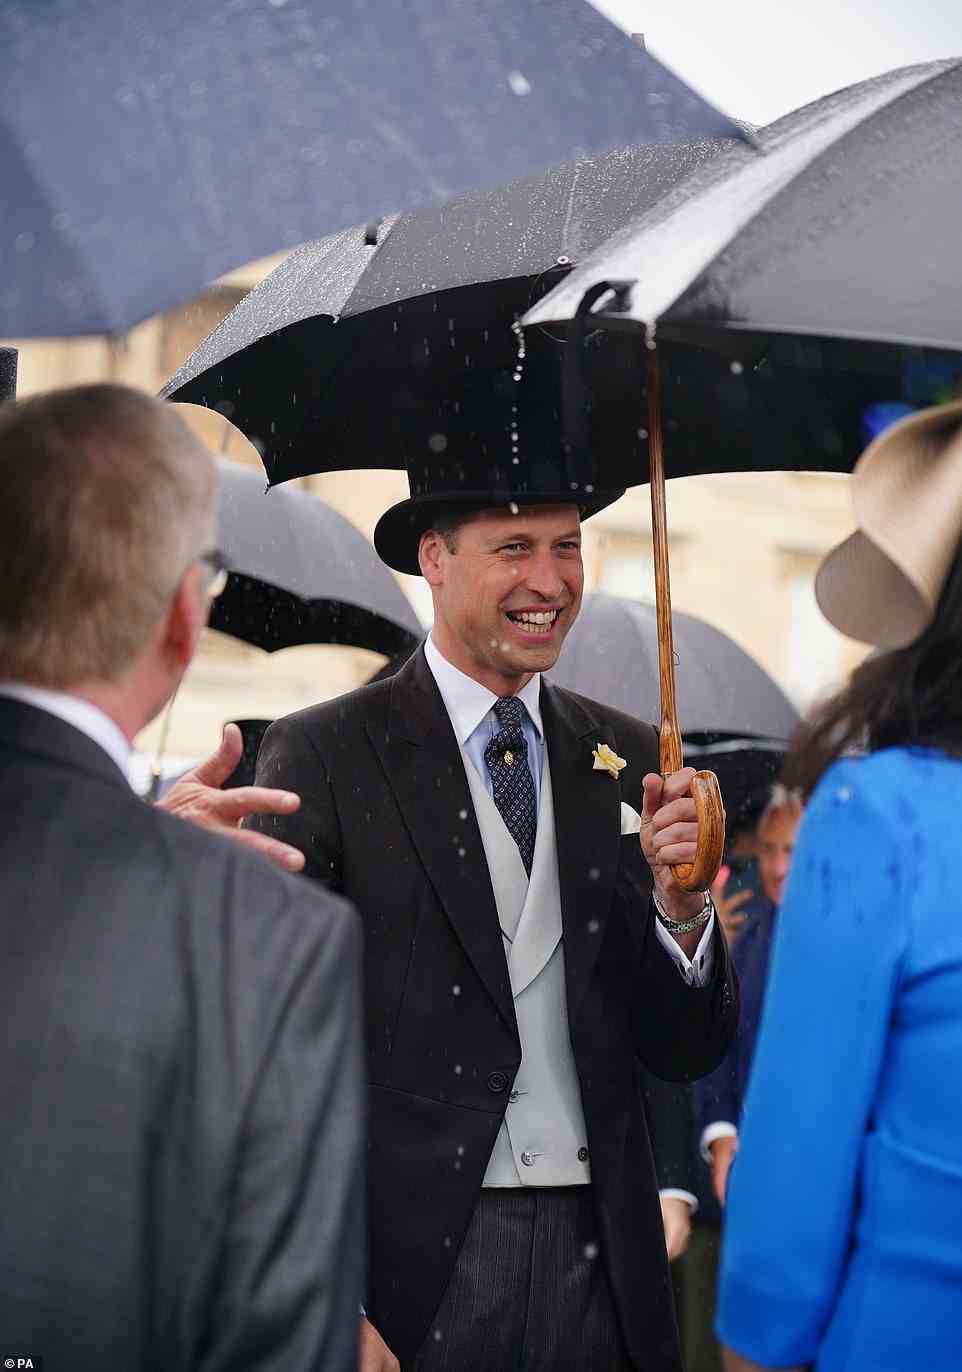 The Duke of Cambridge shared a smile with a group of attendees as they chatted at the garden party at Buckingham Palace